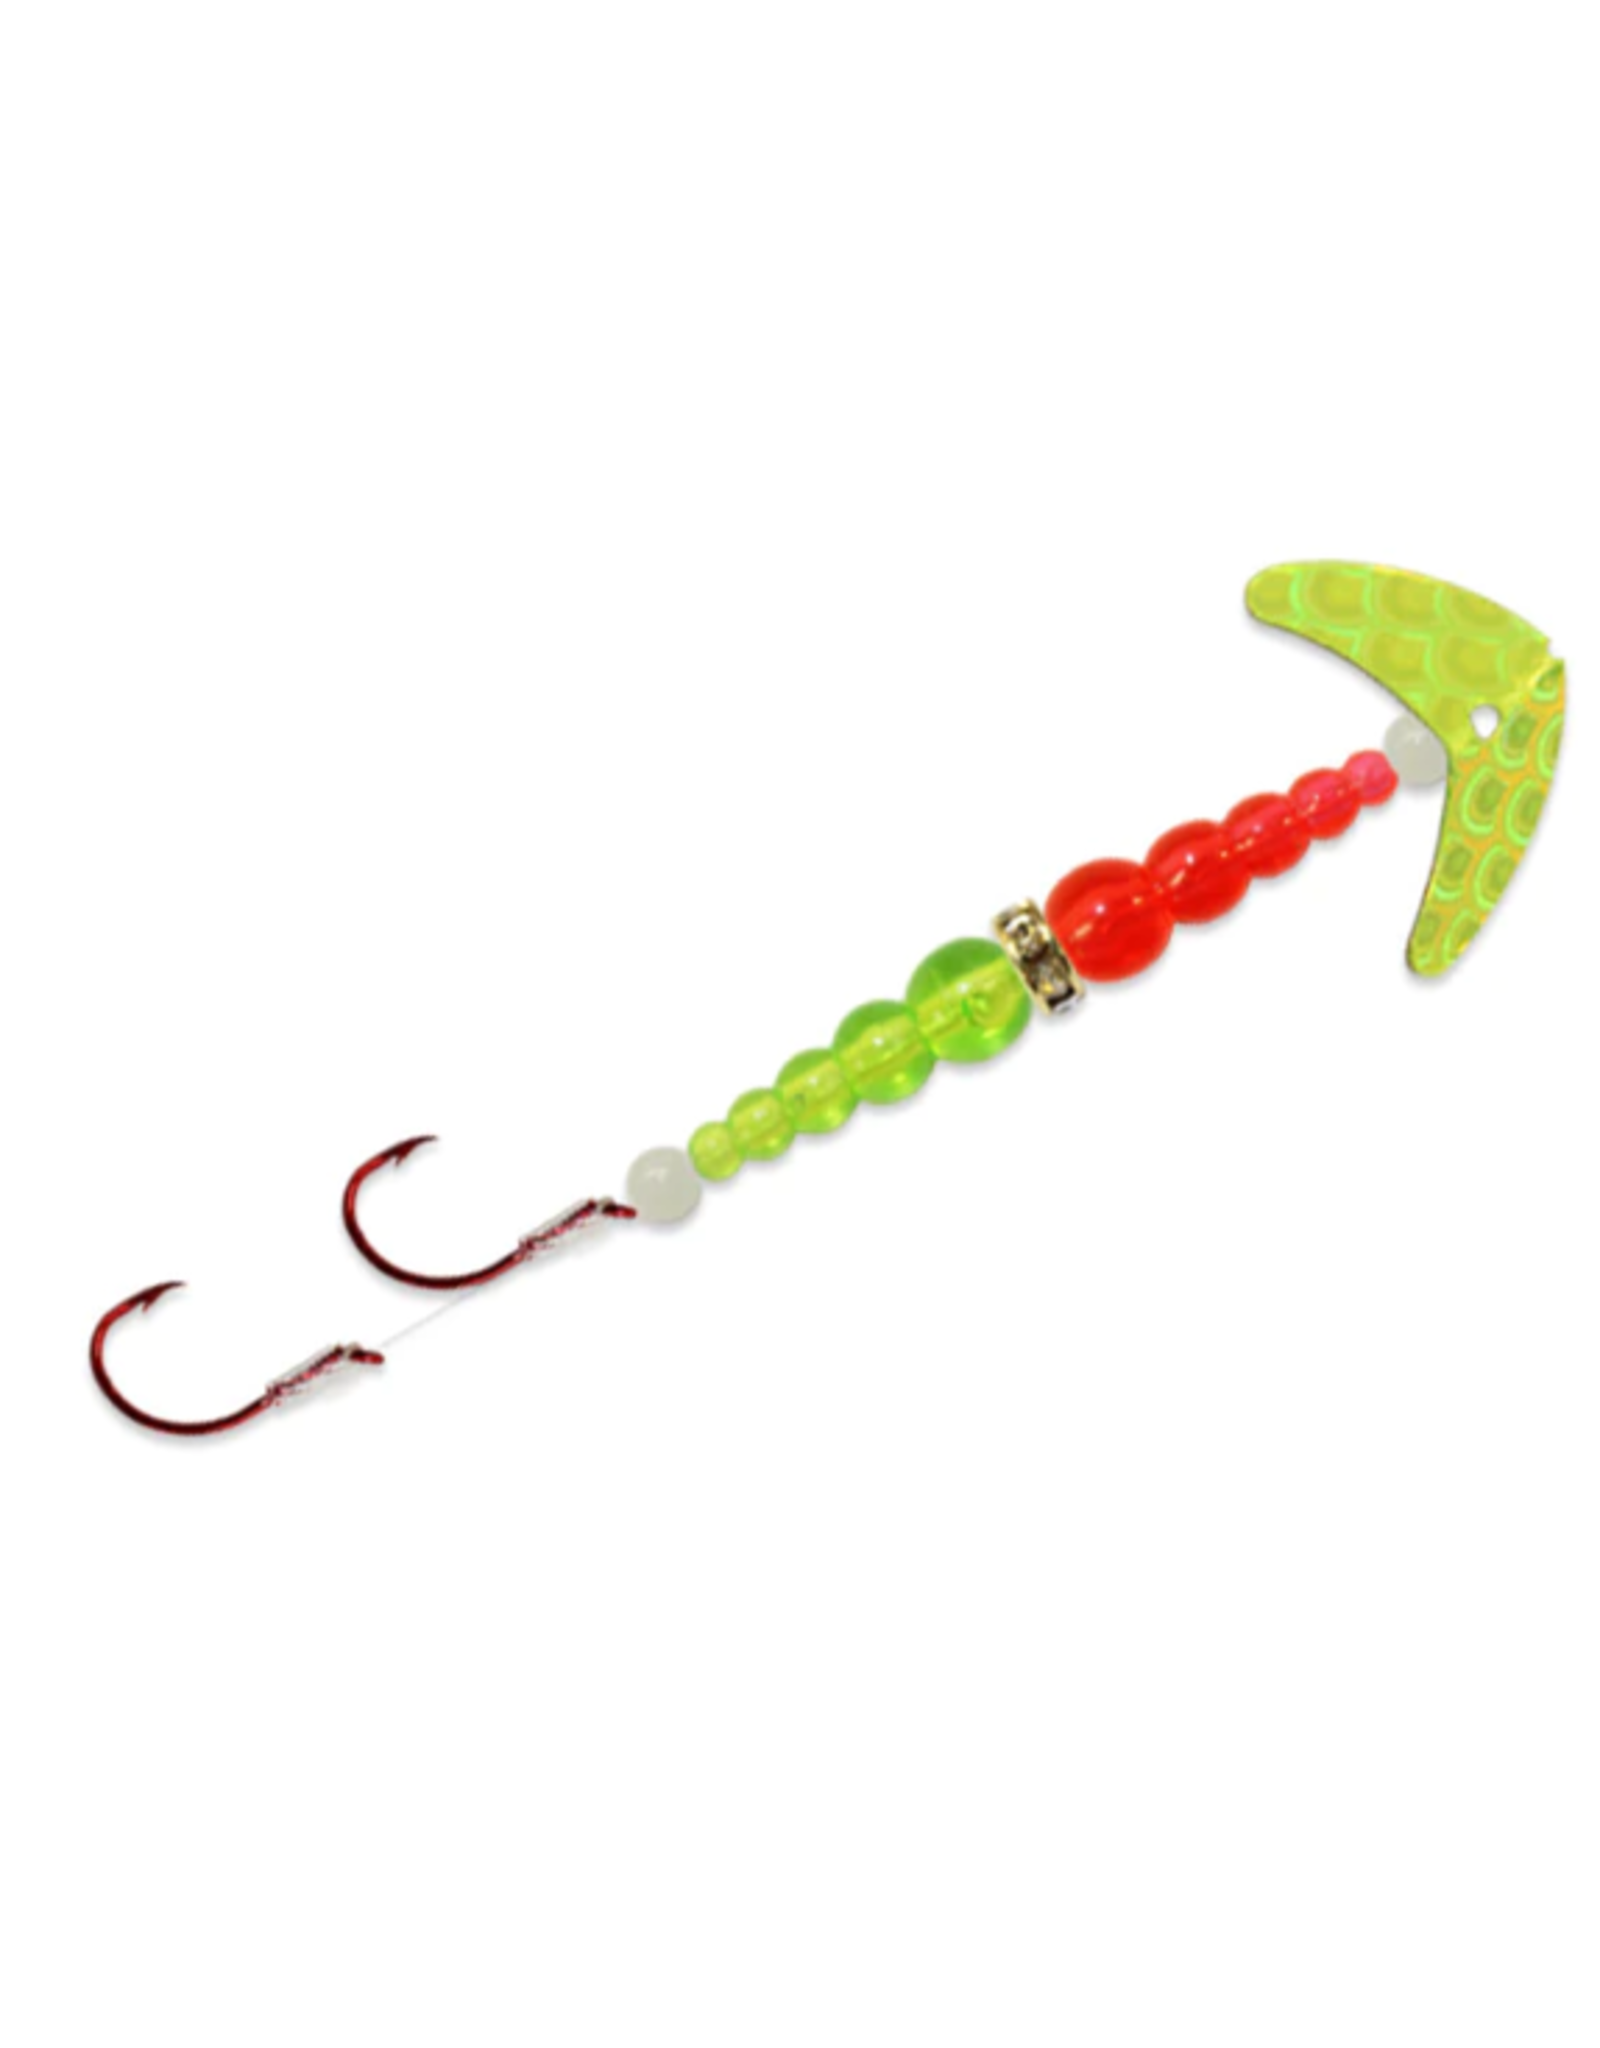 Mack's Double Whammy Pro Spinner - Chartreuse and Fluorescent Red - #4 Hook w/ Leader